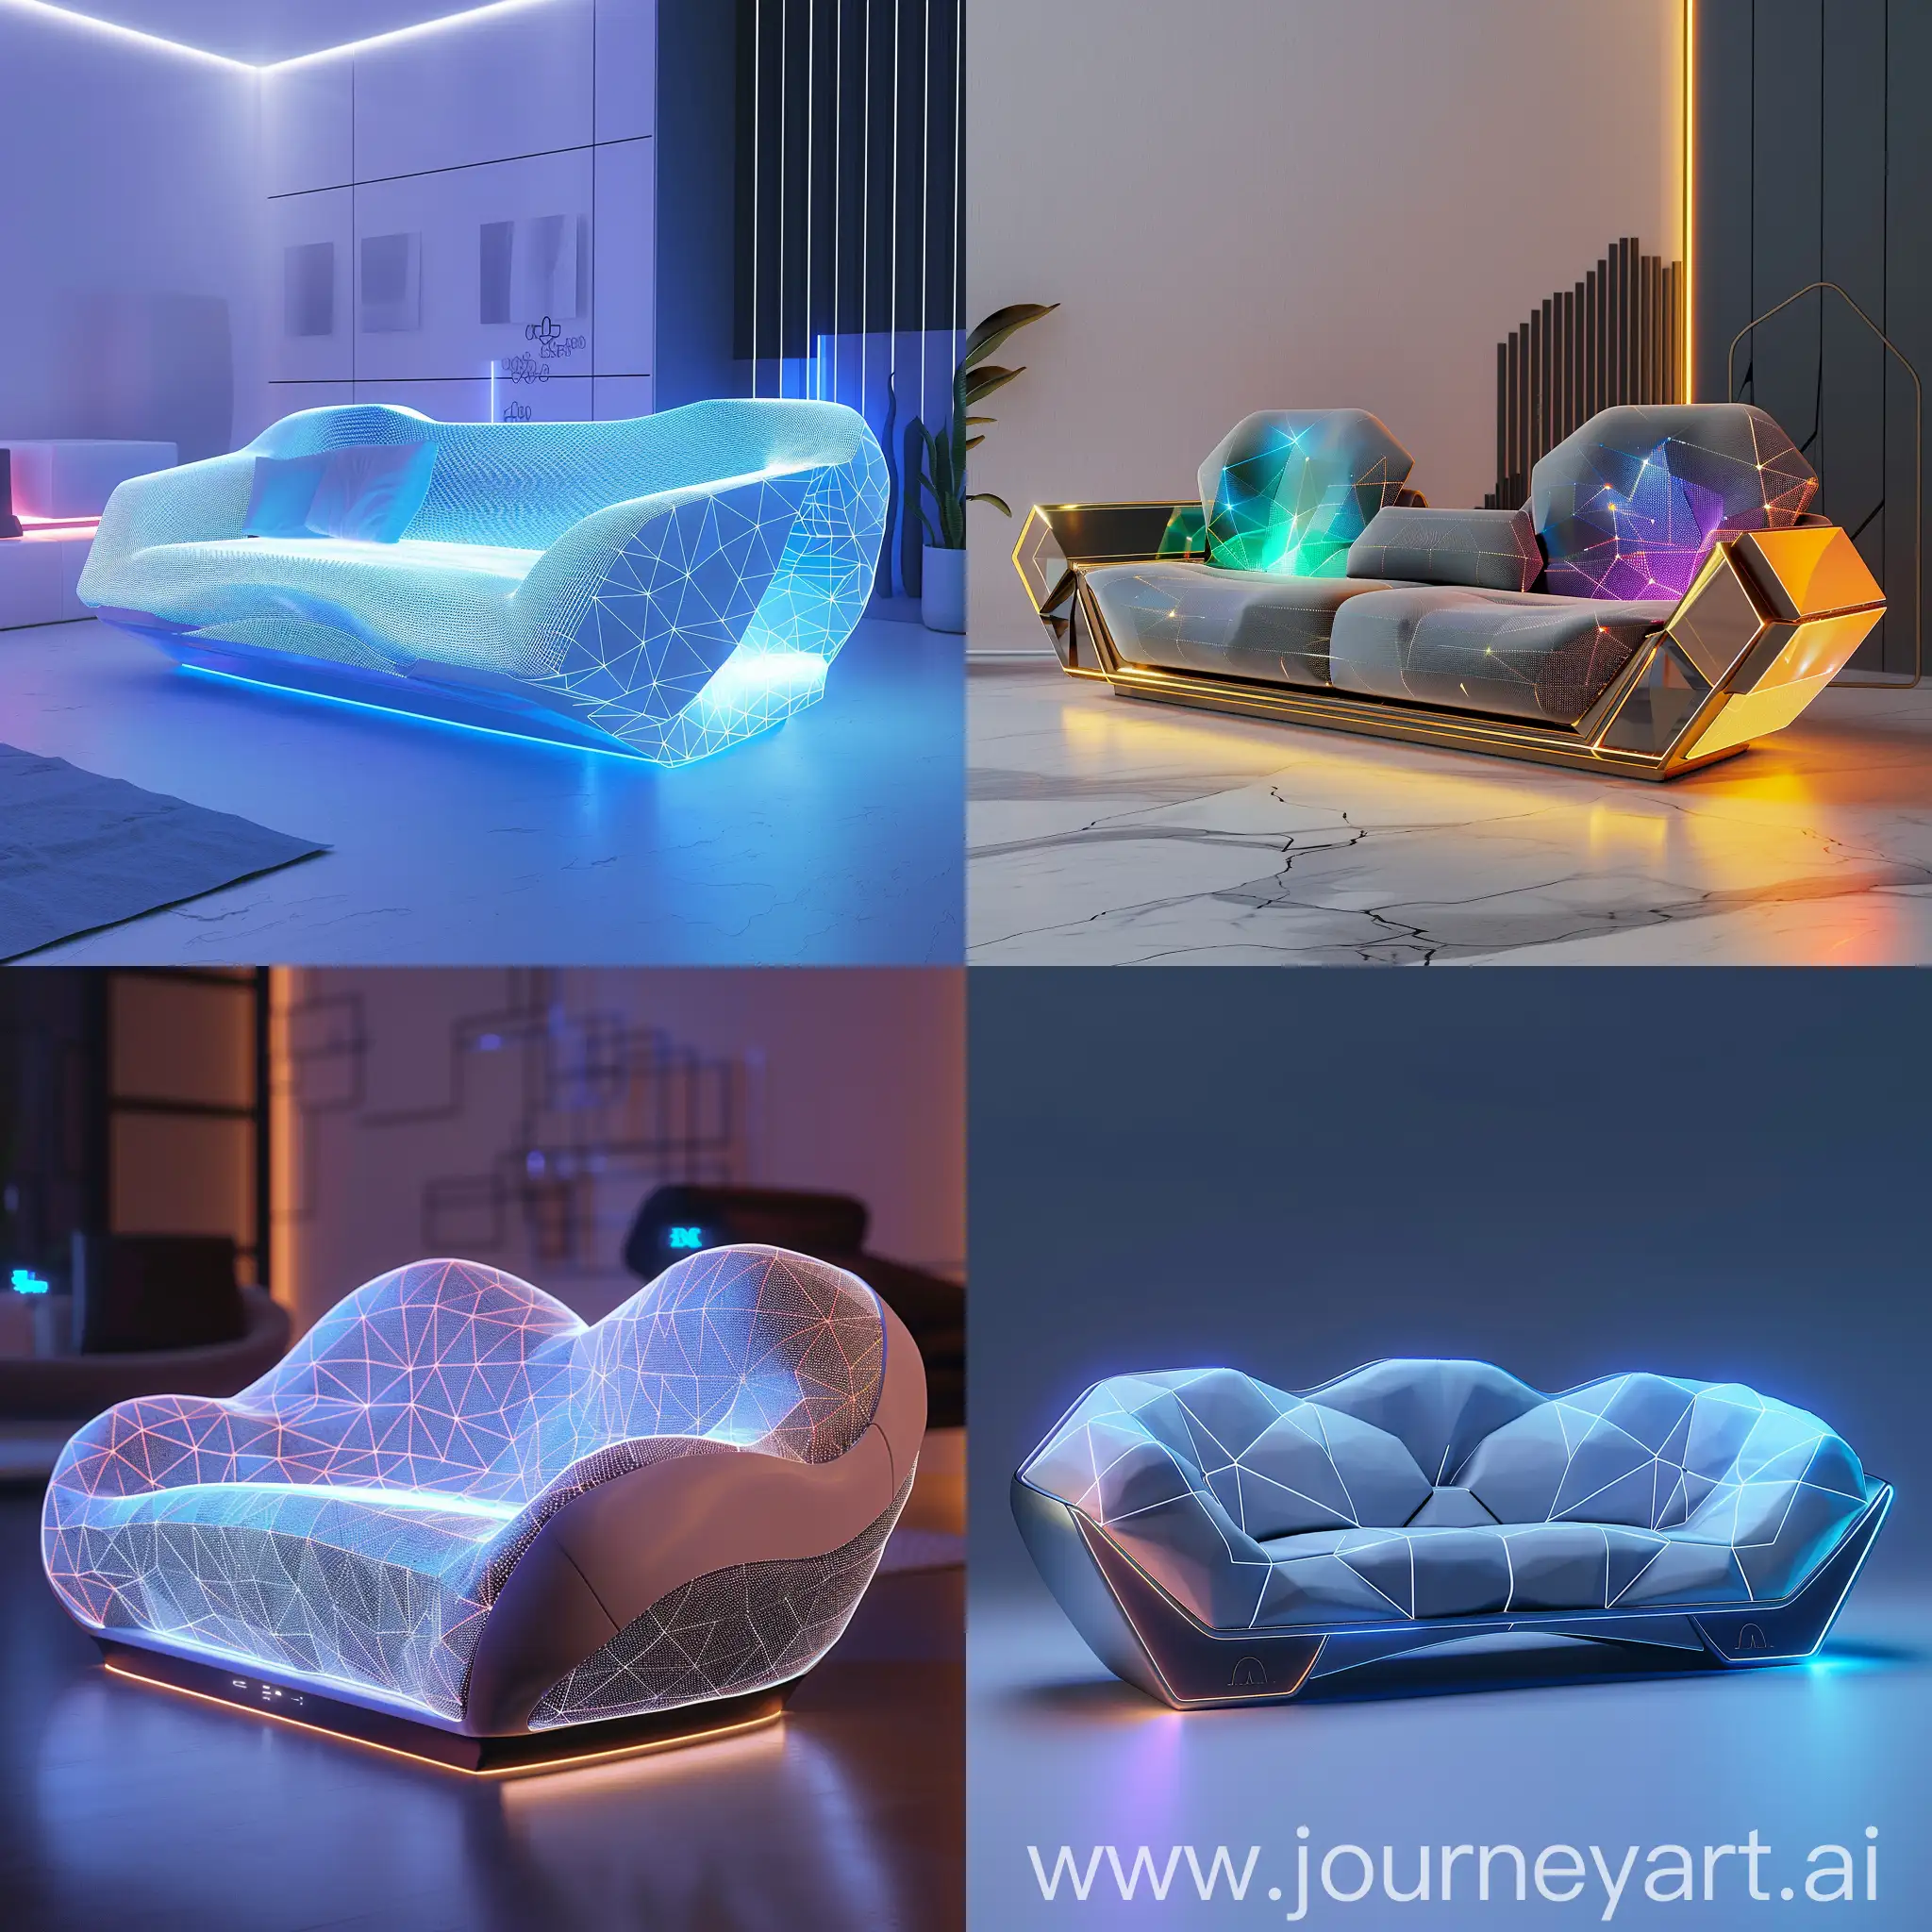 Futuristic sofa, advanced information age, Embedded Smart Sensors, Dynamic Shape-shifting, Integrated Holographic Display, Biometric Authentication, Smart Climate Control, Self-repairing Materials, Modular Design, Integrated Wireless Charging, AI-powered Assistance, Environmental Monitoring, IoT Integration, Data Analytics for Health, Augmented Reality Enhancement, Blockchain-enabled Security, Energy Harvesting, Personalized AI Recommendations, Voice and Gesture Control, Biophilic Design Elements, Virtual Collaboration Tools, Emotion Sensing Technology, Minimalist Aesthetic, LED Lighting Integration, Transparent or Translucent Materials, Dynamic Color-changing Surfaces, Geometric Patterns and Textures, Floating Design Elements, Foldable or Transformable Features, Augmented Reality Decor, Biophilic Design Integration, Interactive Touch Surfaces, Smart Fabric Technology, Nanotechnology-enhanced Materials, 3D Printed Components, Mixed Reality Projection Mapping, Self-Adjusting Ergonomic Features, Carbon-negative Materials, Customizable Modular Design, Embedded Augmented Reality Mirrors, Smart Surface Coatings, Gesture-controlled Ambient Lighting, unreal engine 5 --stylize 1000